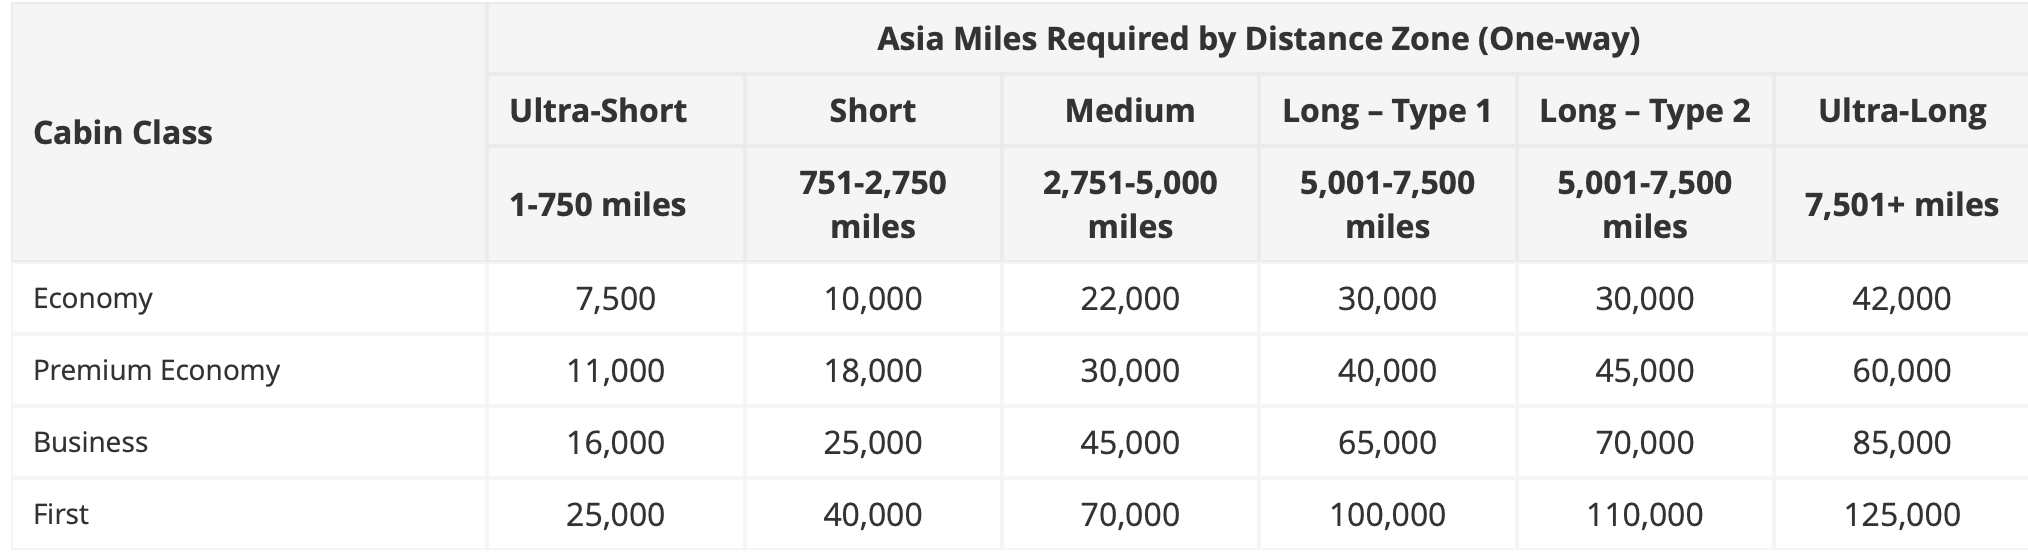 Ultimate guide to Cathay Pacific Asia Miles The Points Guy The